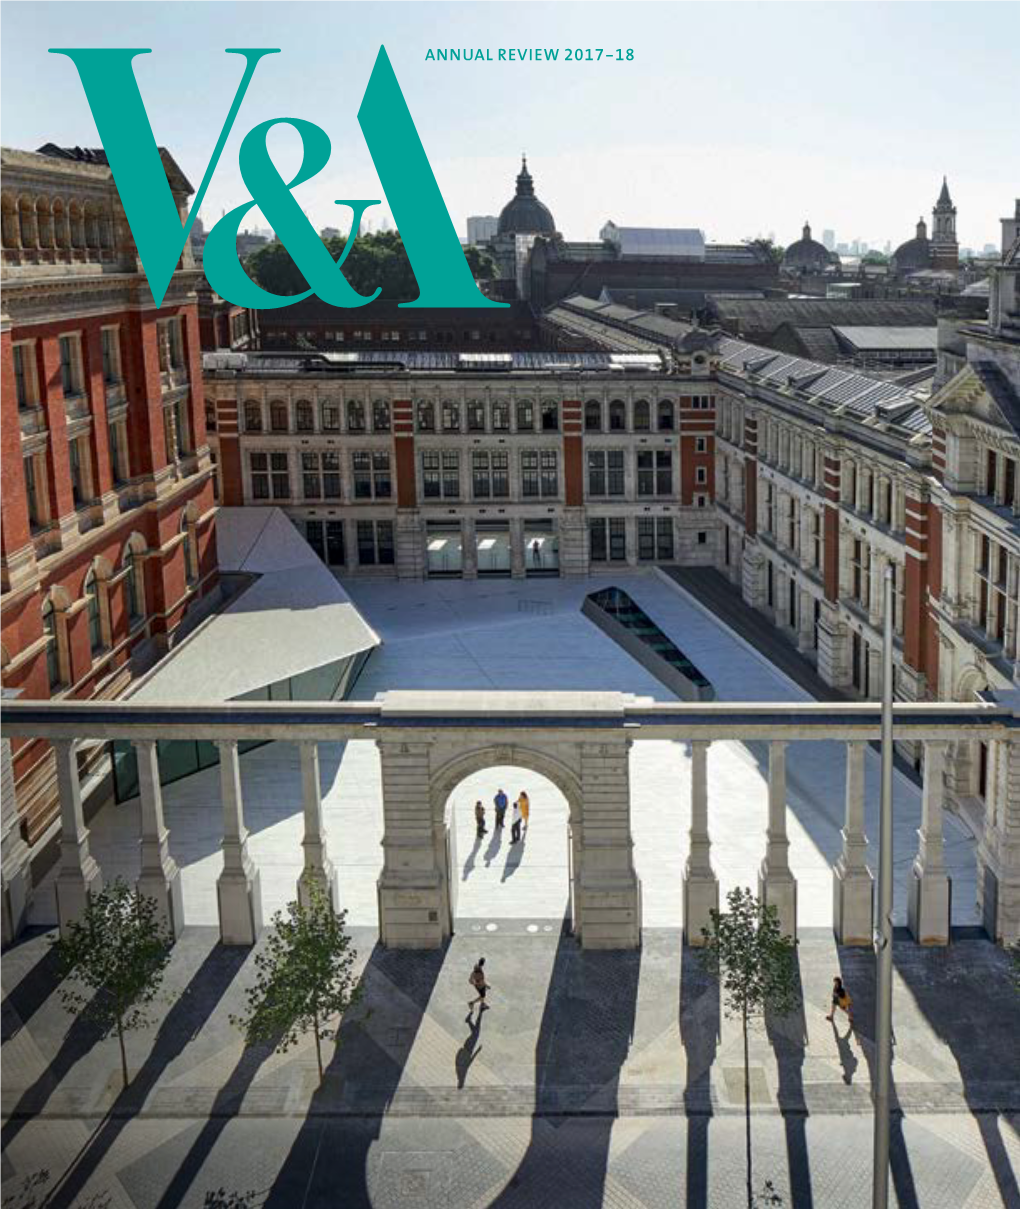 ANNUAL REVIEW 2017-18 V&A Annual Review 2017-18  V&A ANNUAL REVIEW 2017-18